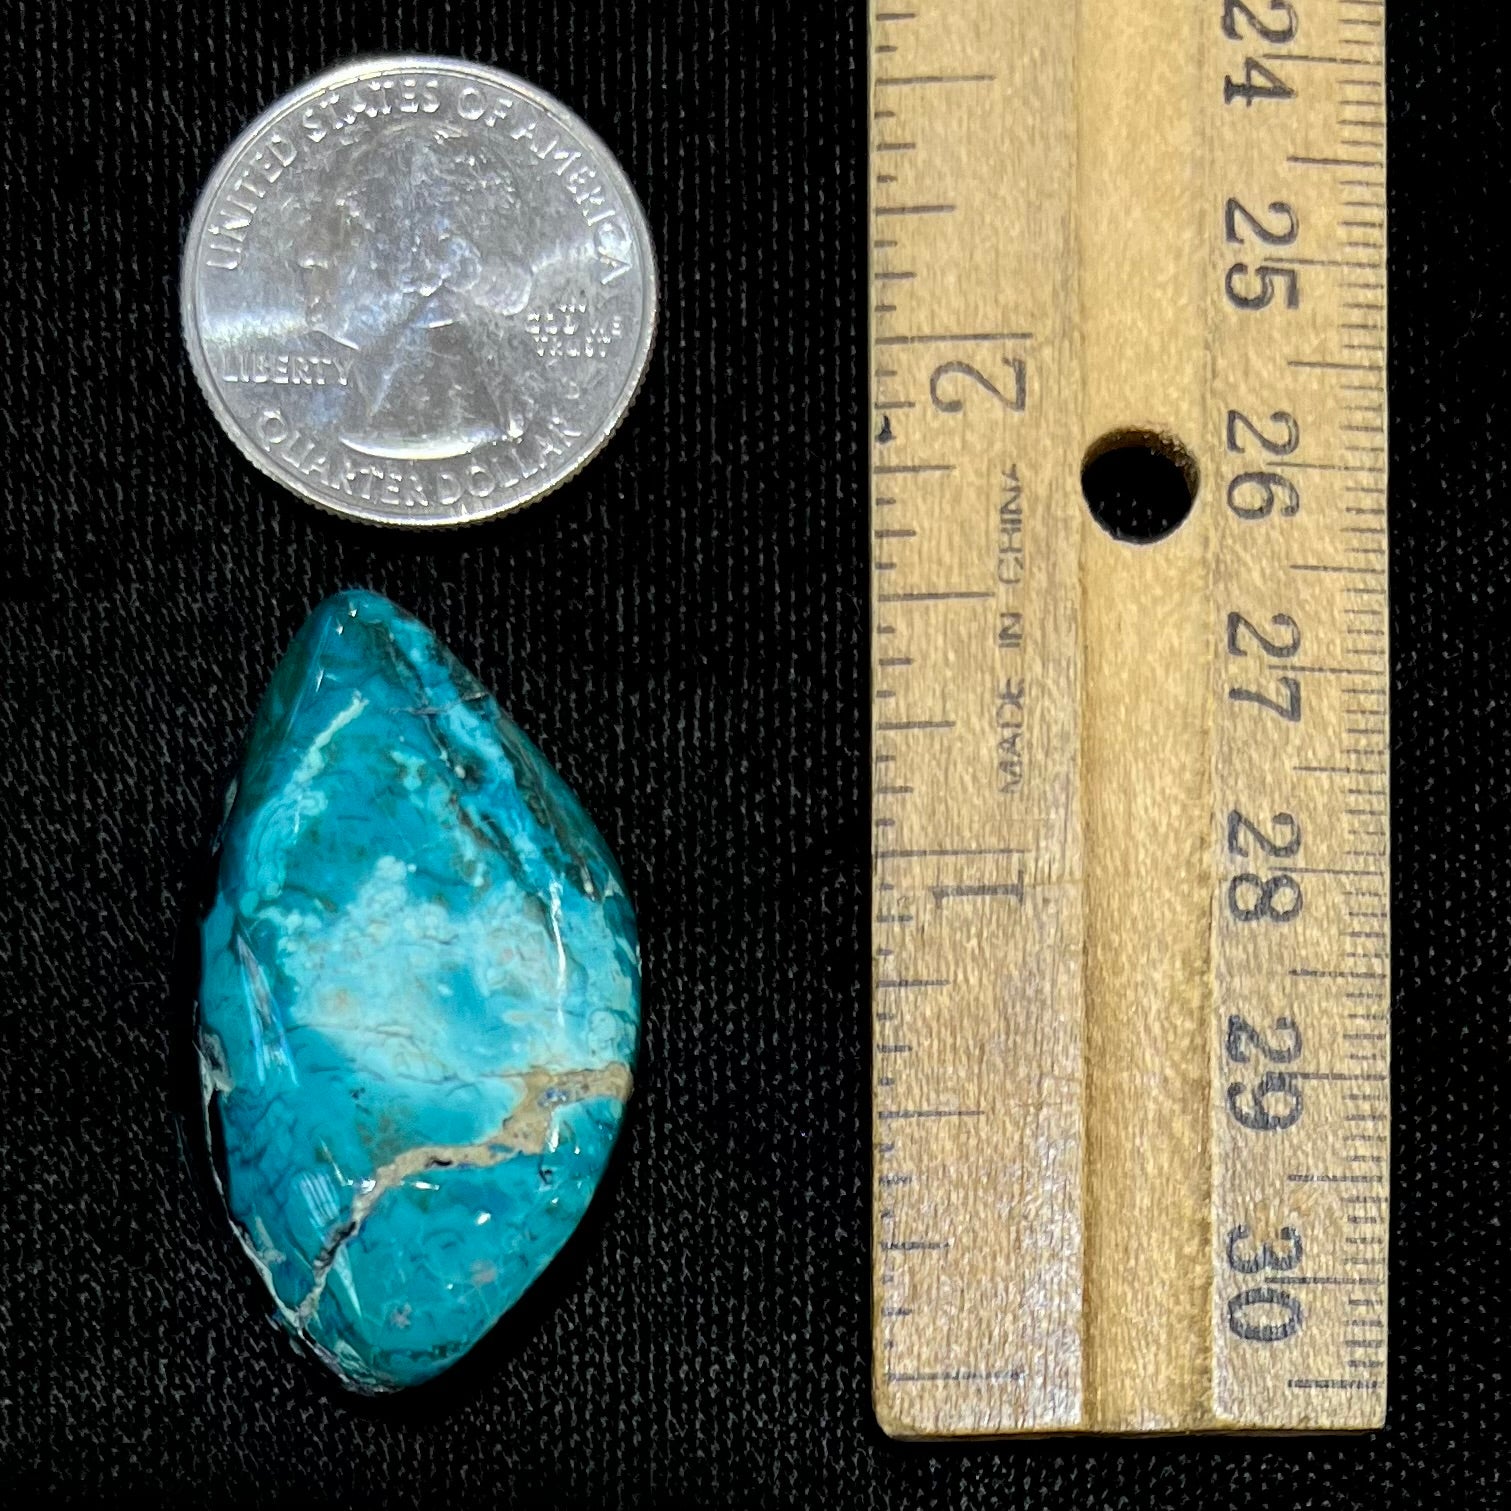 A loose chrysocolla stone with turquoise inclusions.